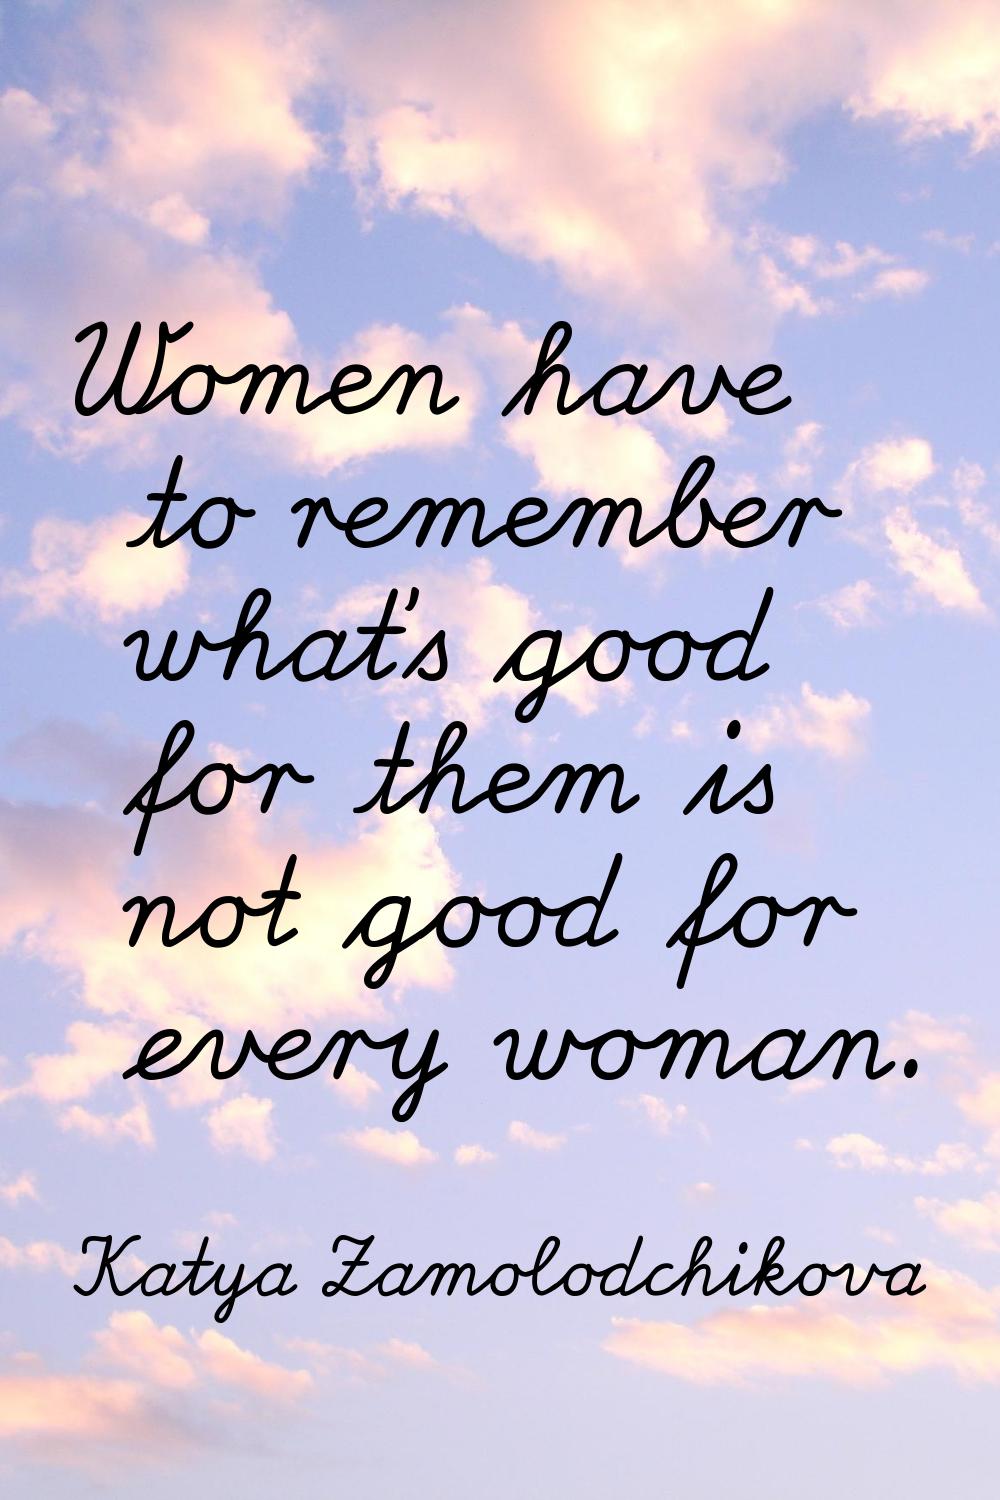 Women have to remember what's good for them is not good for every woman.